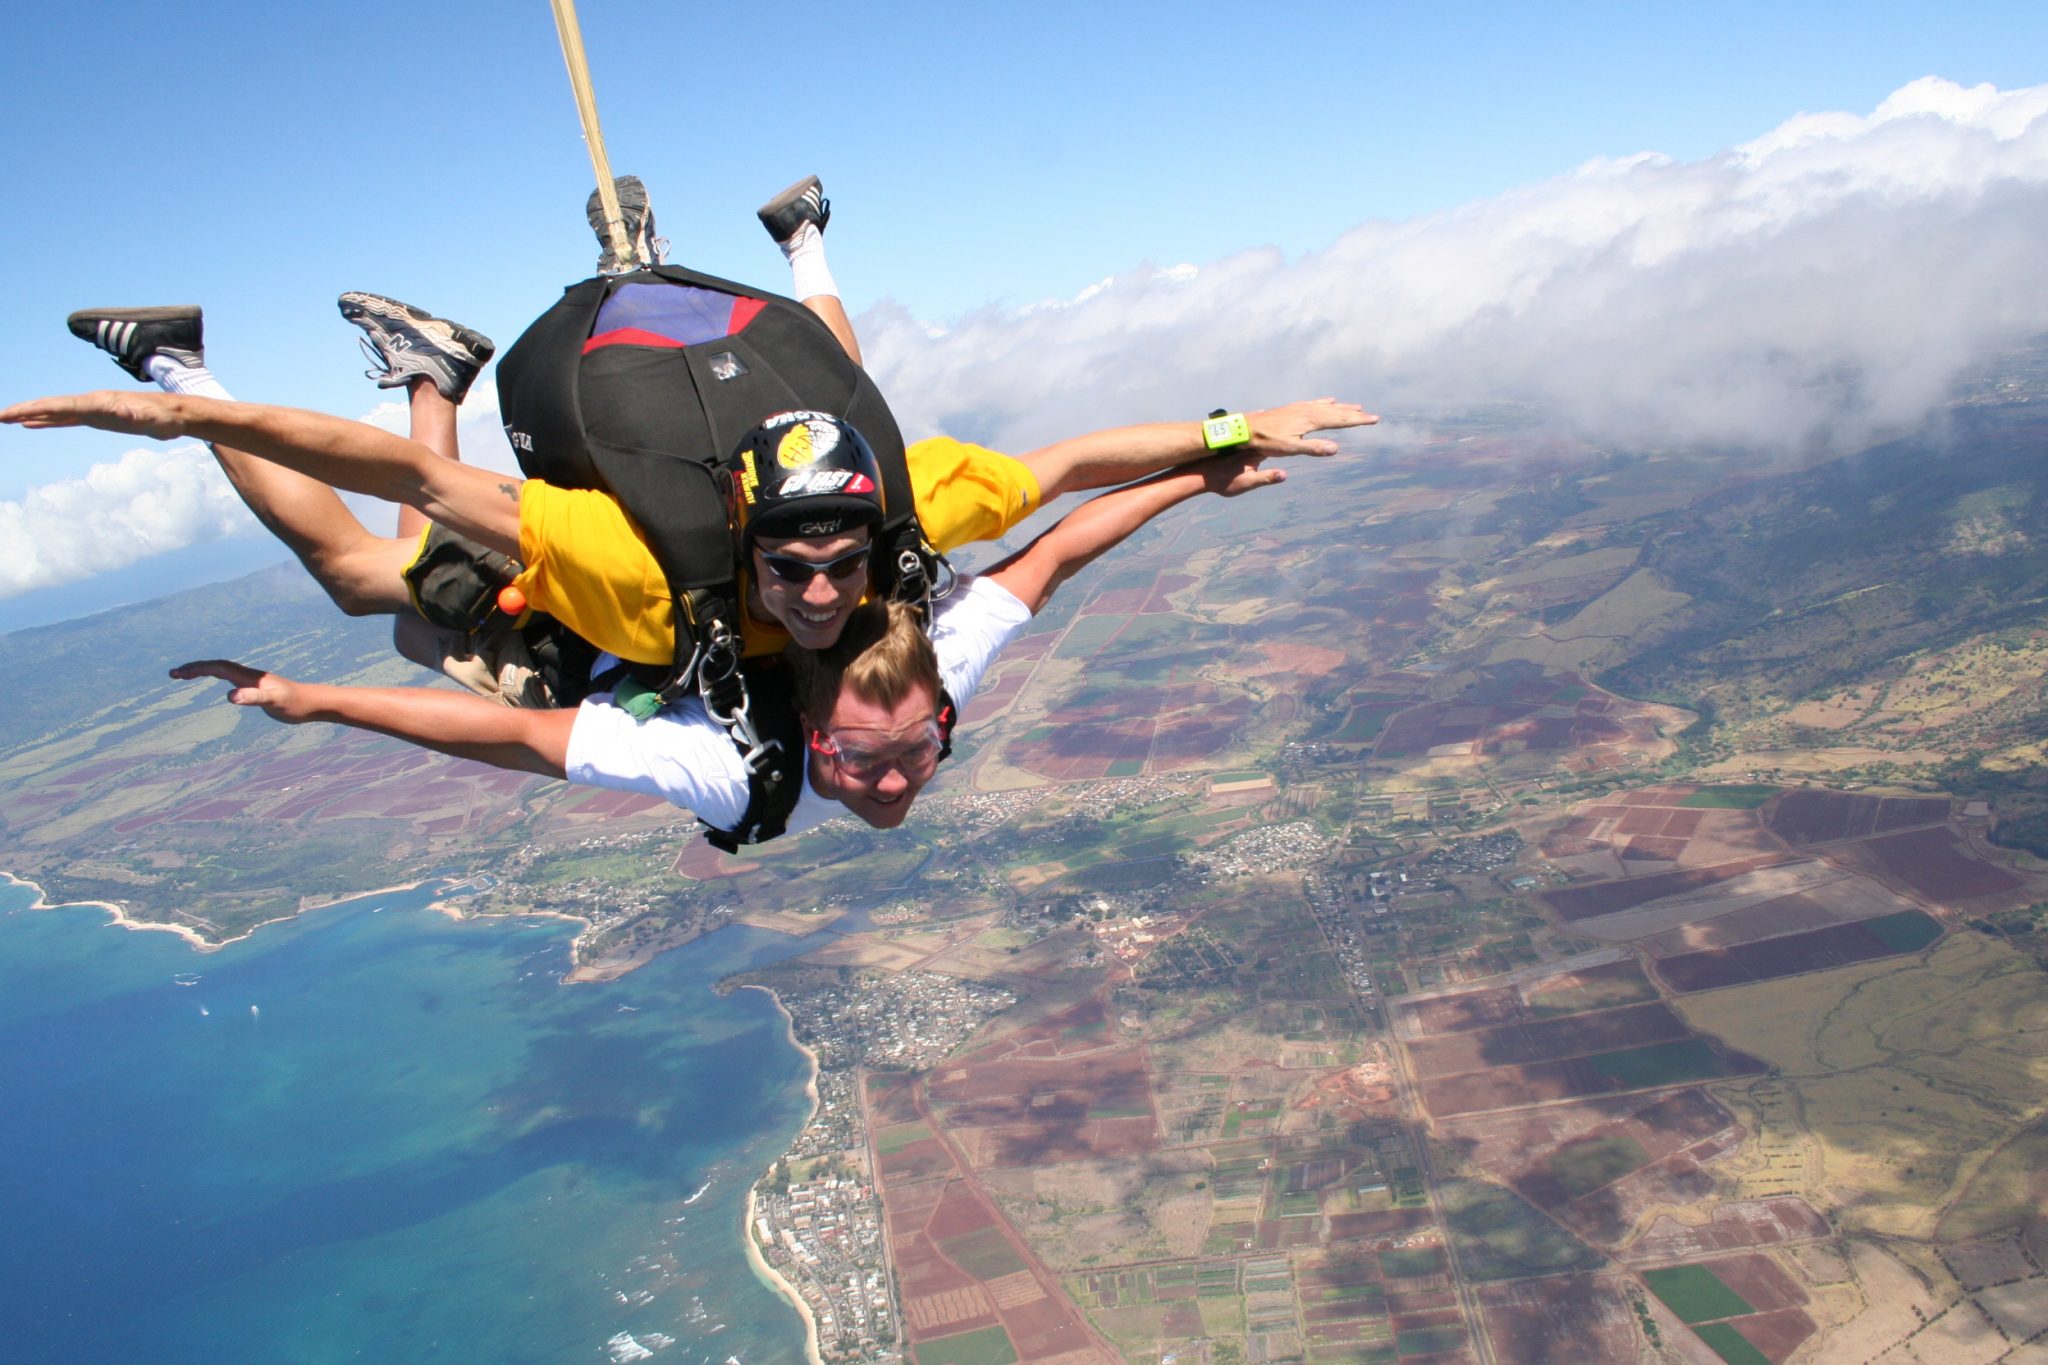 Oahu Hawaii - Best Places in the World to Skydive